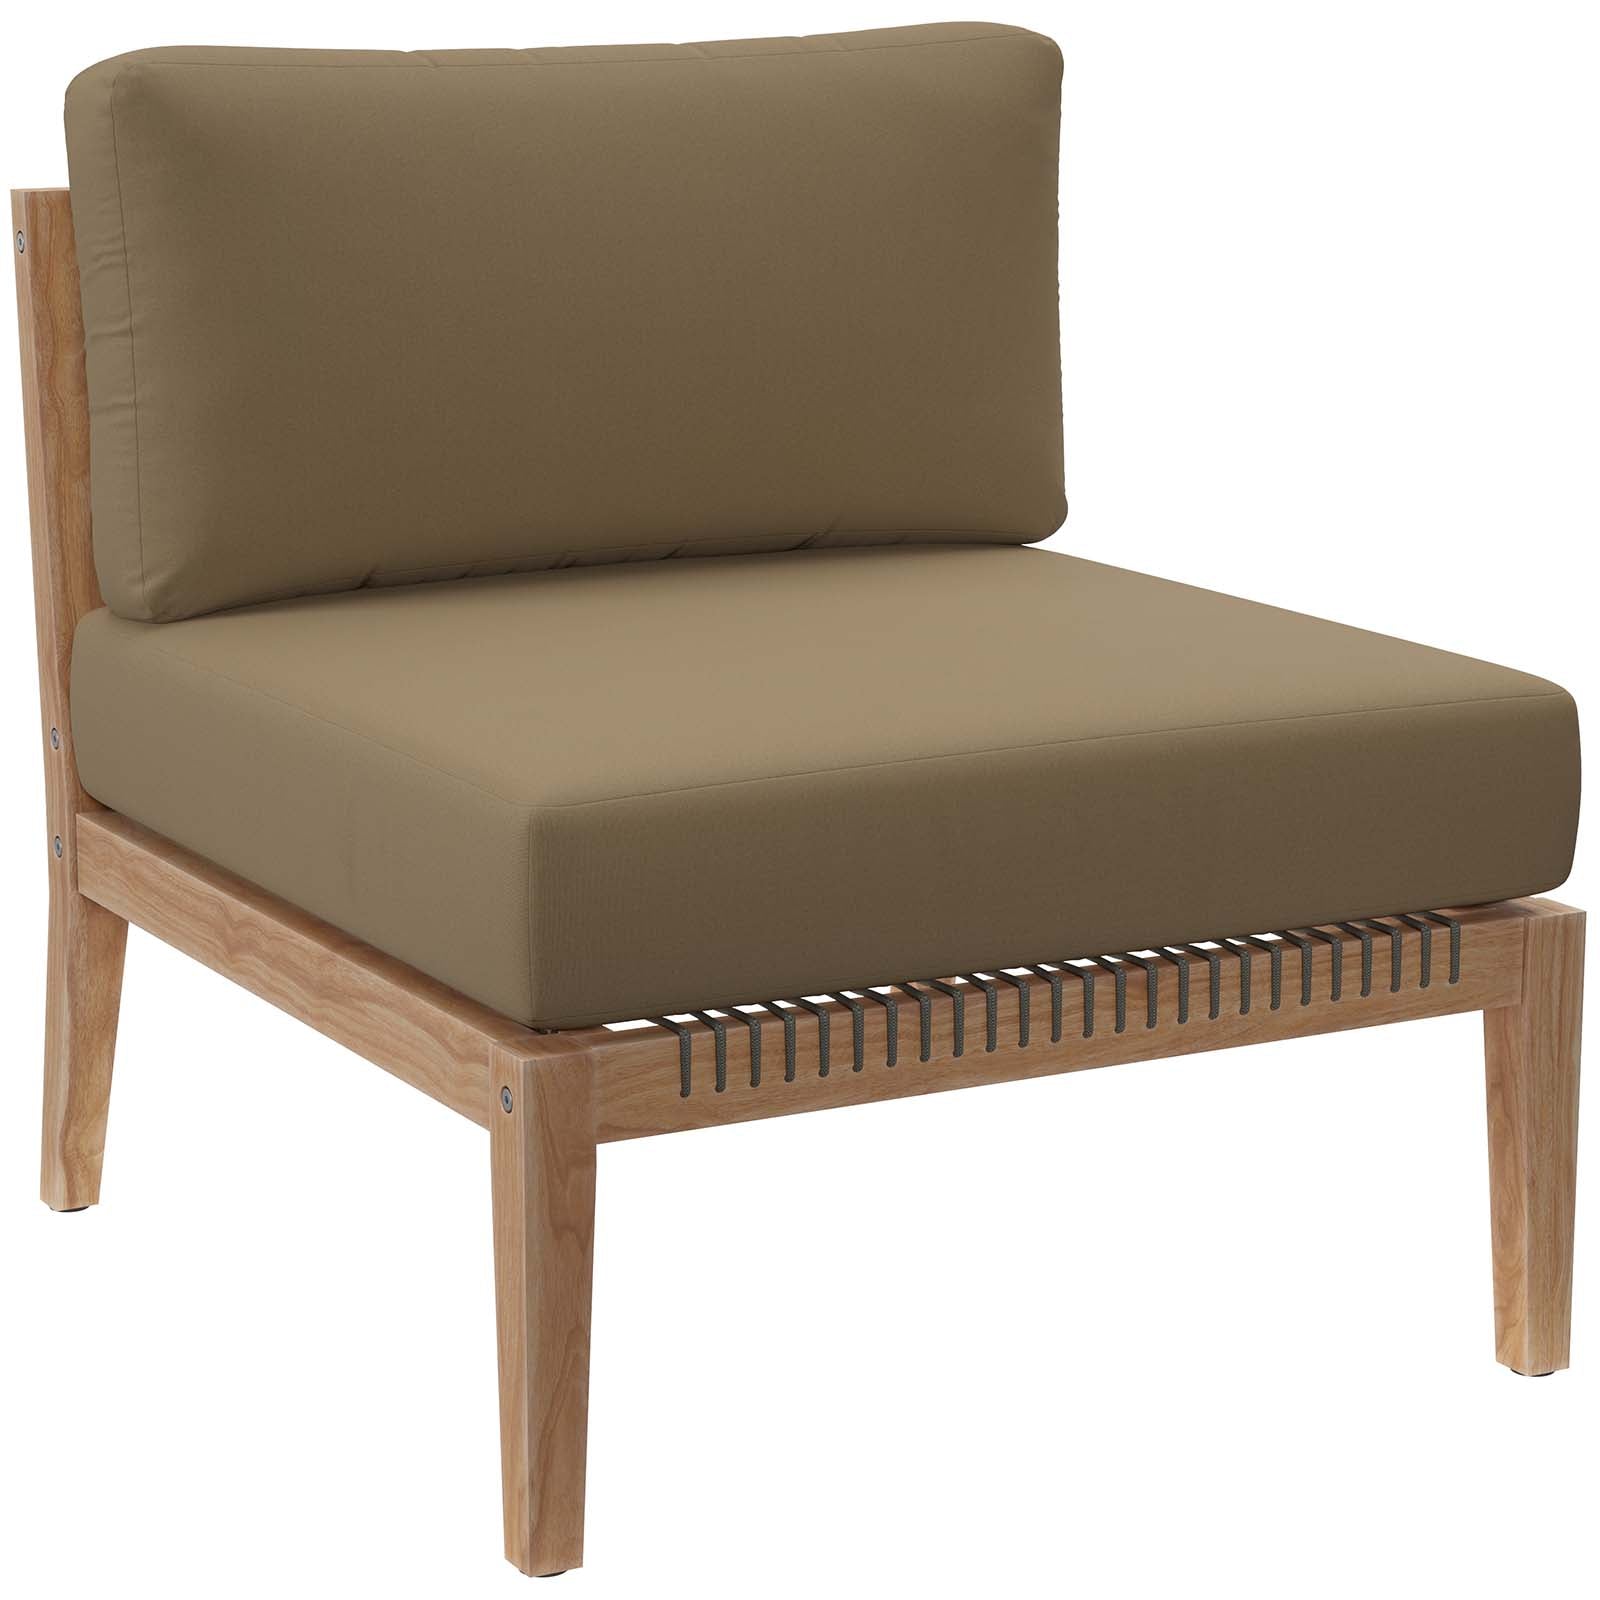 Modway Outdoor Sofas - Clearwater-Outdoor-Patio-Teak-Wood-Armless-Chair-Gray-Light-Brown